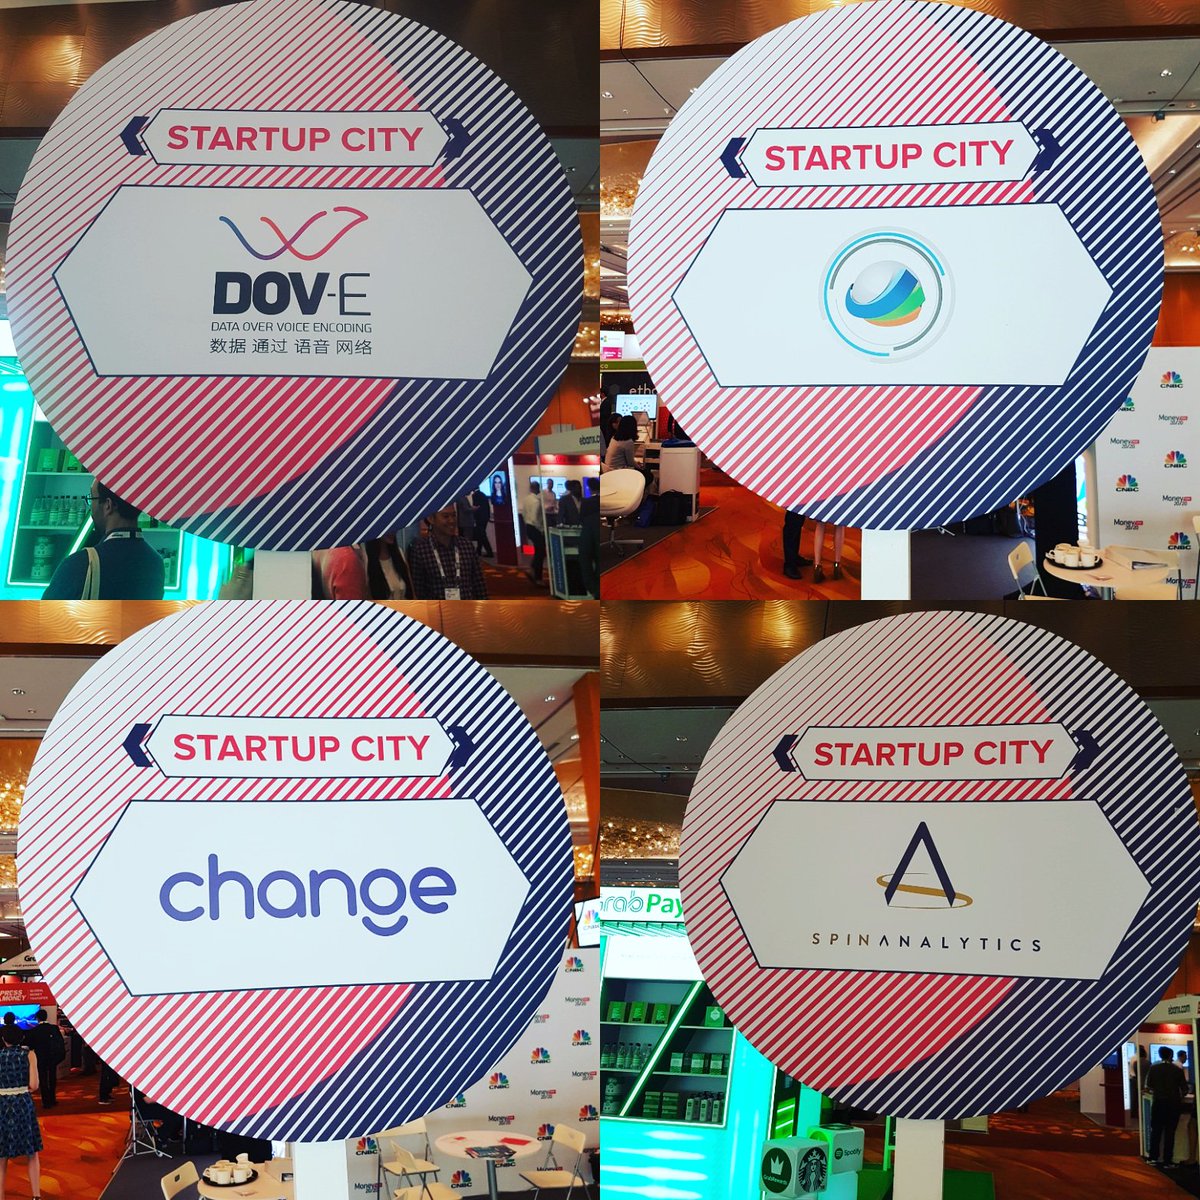 Come and visit the amazing startups that are already writing the future of finance with @BBVAInnovation in #Money2020Asia #startupcity